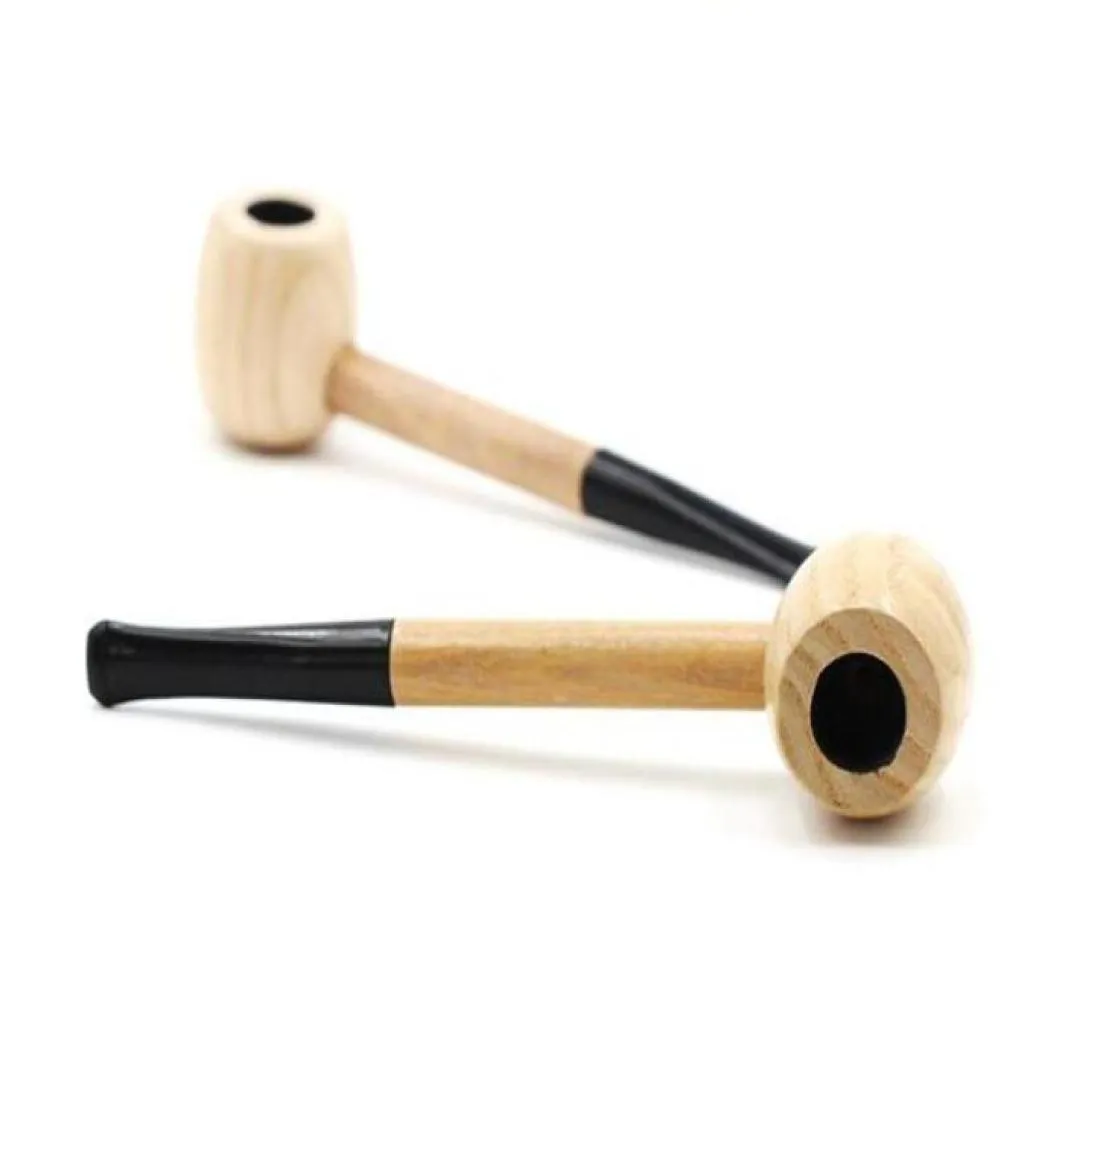 Hand Wood Smoking Pipe Tobacco Wooden Cigarette Herbal Filter Tips Pipes Handmade 155mm length Accessories Tools Oil Rigs6106494